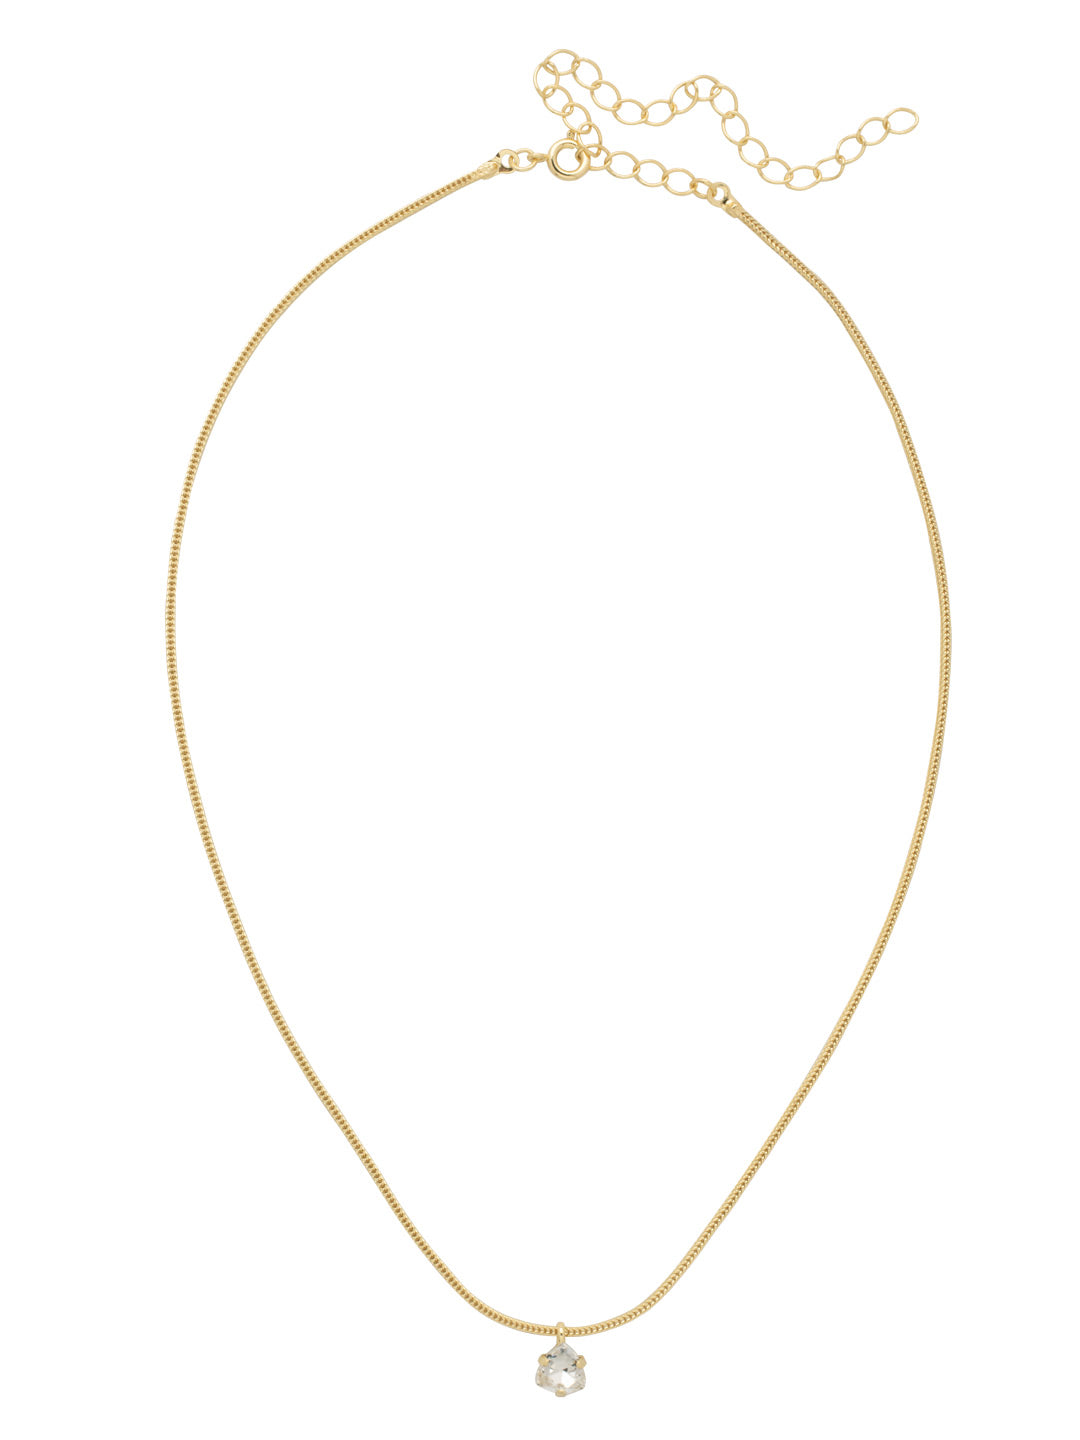 Sedge Stud Pendant Necklace - NFM5BGCRY - <p>The Sedge Stud Pendant Necklace features an adjustable thin snake chain necklace with a single trillion cut stud secured with a lobster claw clasp. From Sorrelli's Crystal collection in our Bright Gold-tone finish.</p>